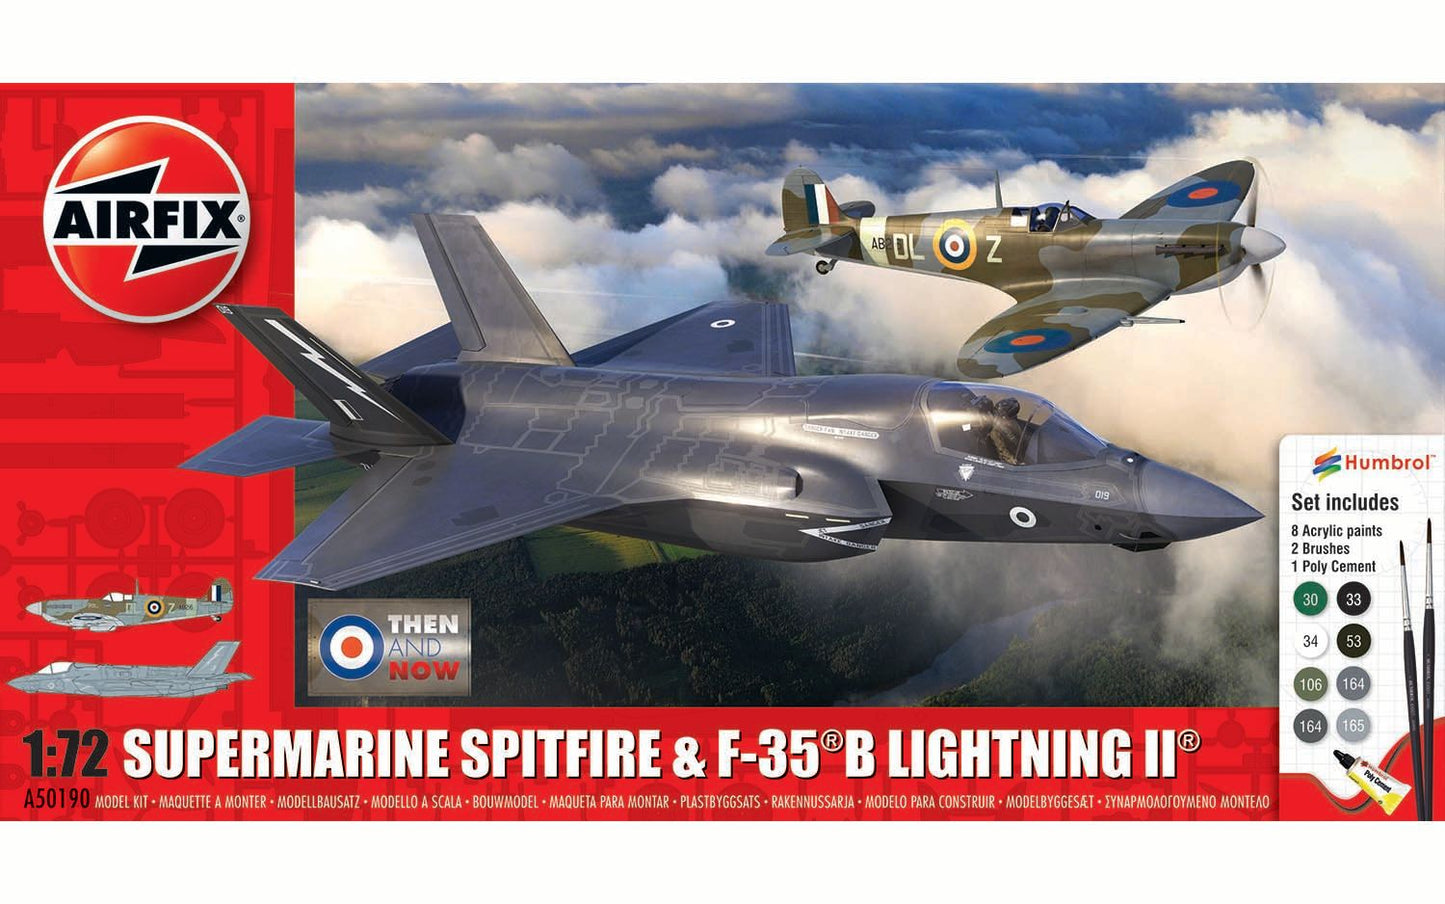 Airfix A50190 Supermarine Spitfire & F-35B Lightning II 'Then and Now' 1/72